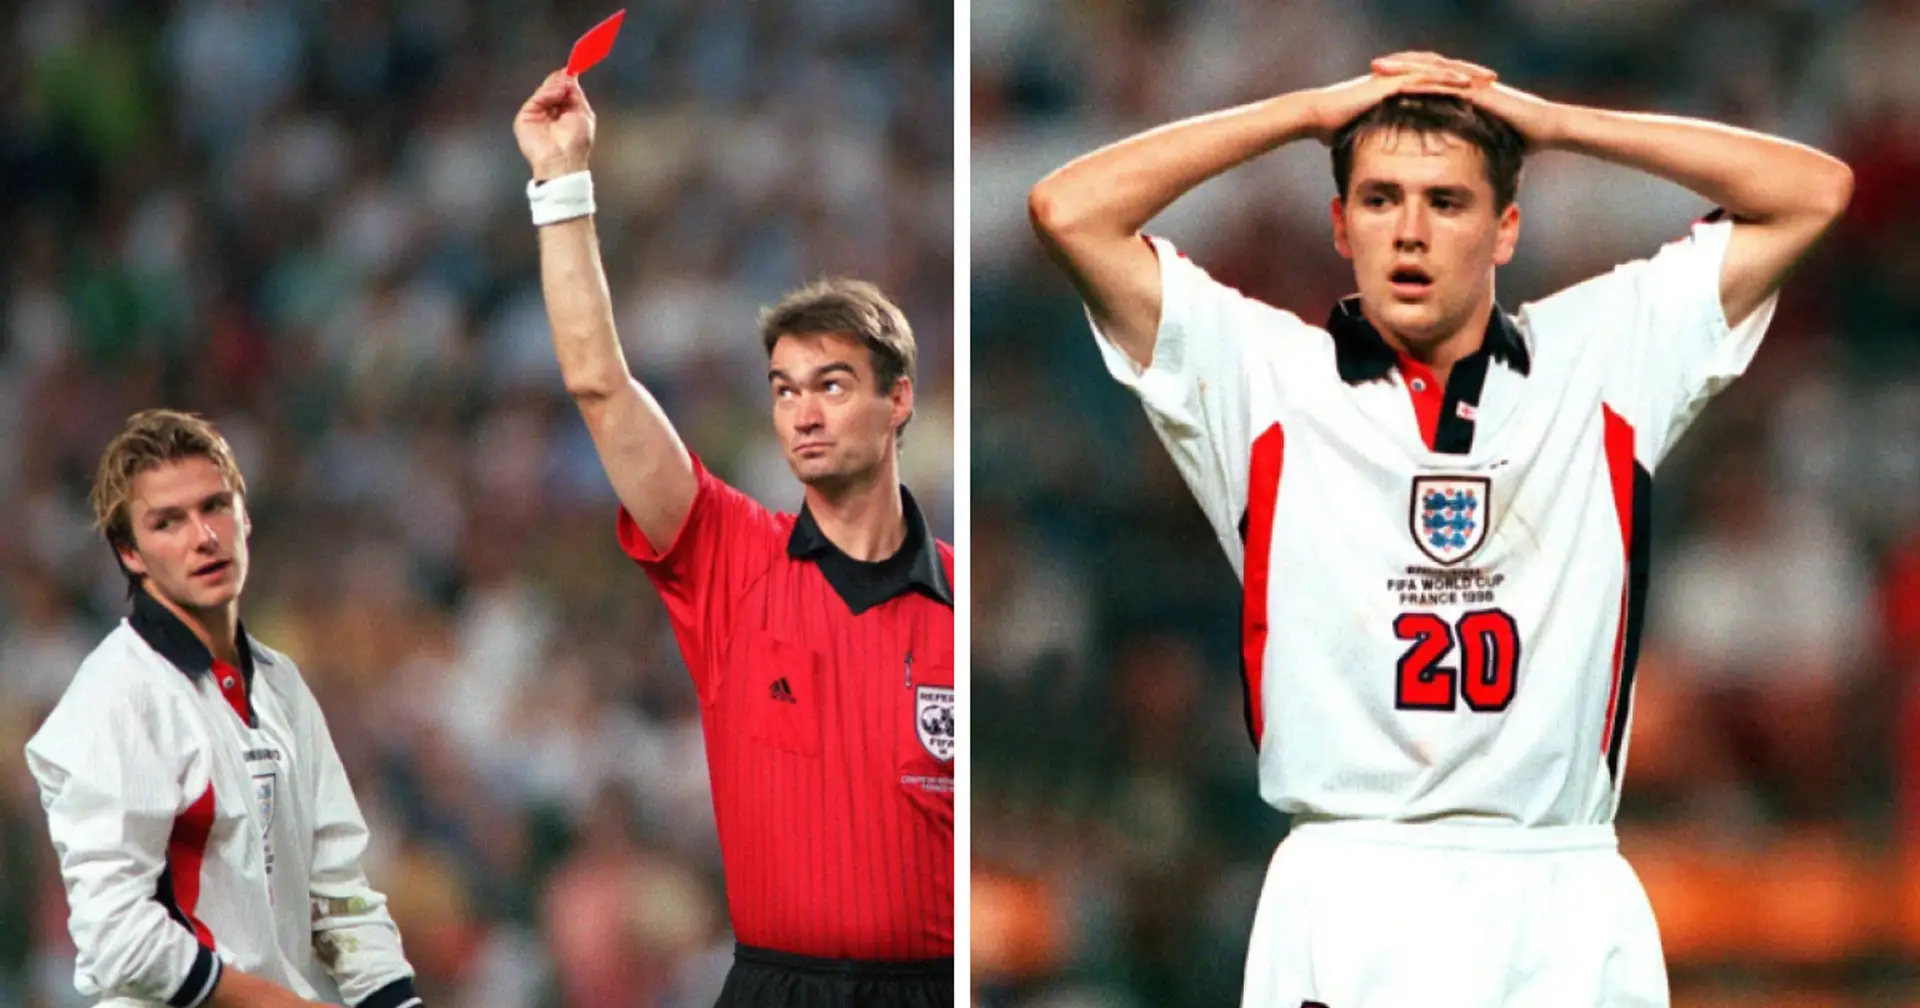 'There was nothing to say about him': Michael Owen on David Beckham's infamous red card